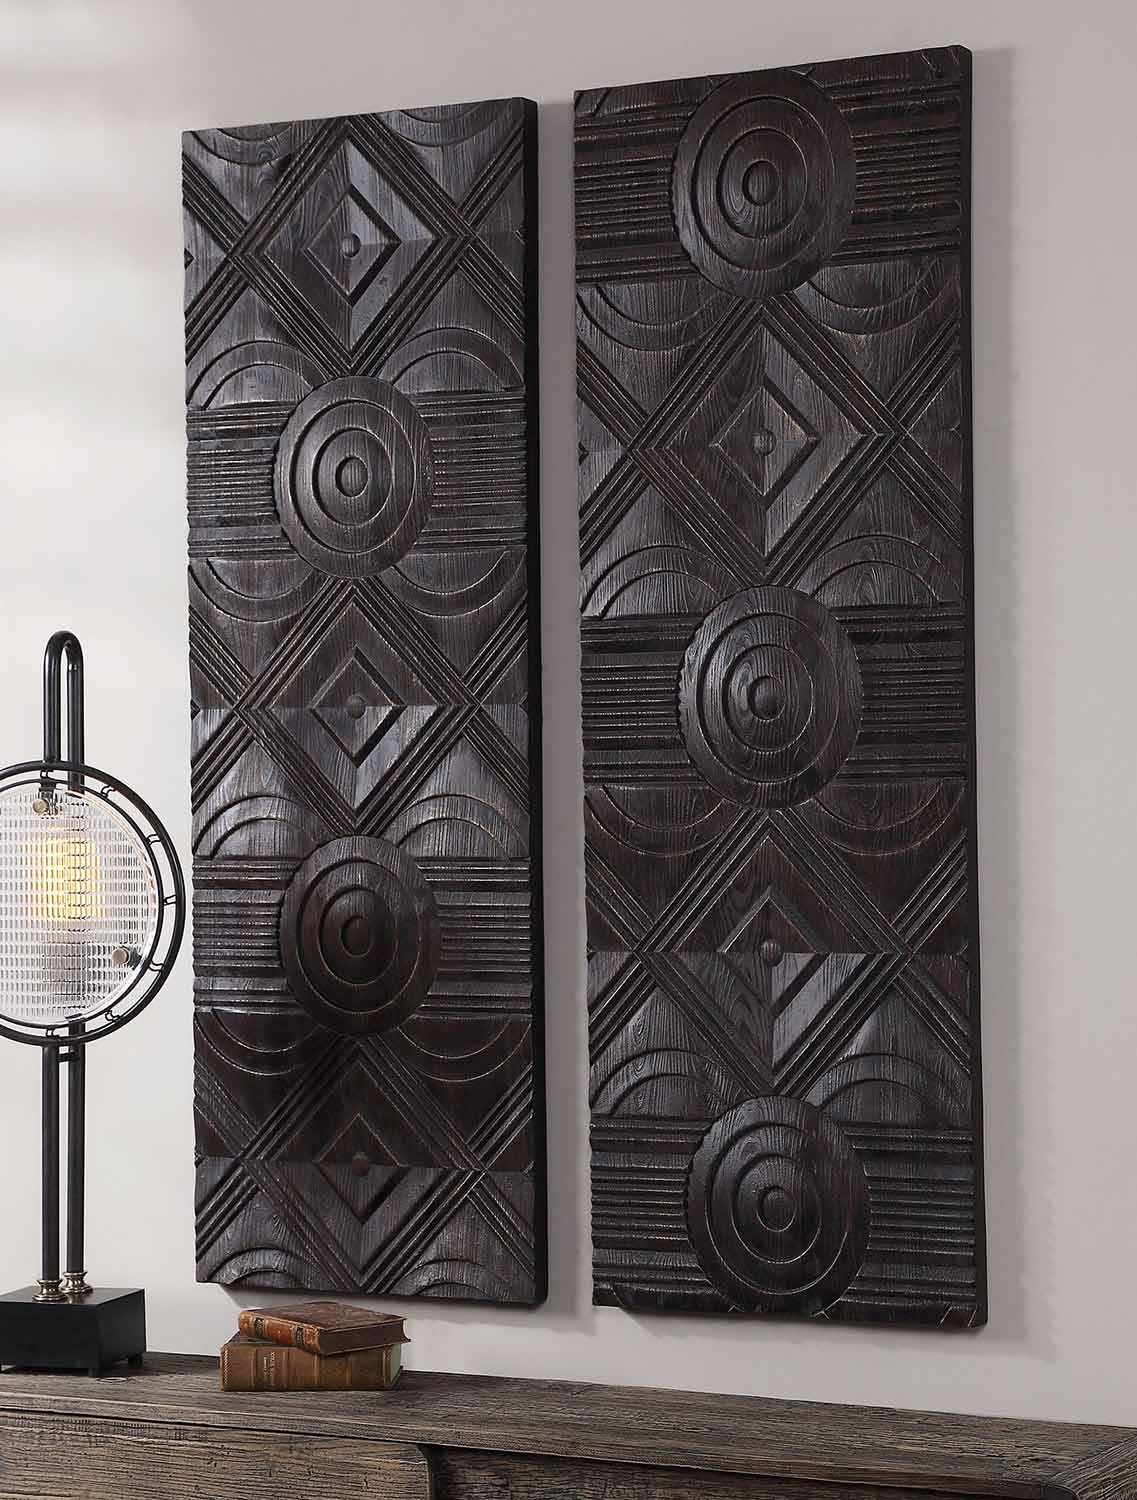 Uttermost Asuka Carved Wood Wall Panels - Set of 2